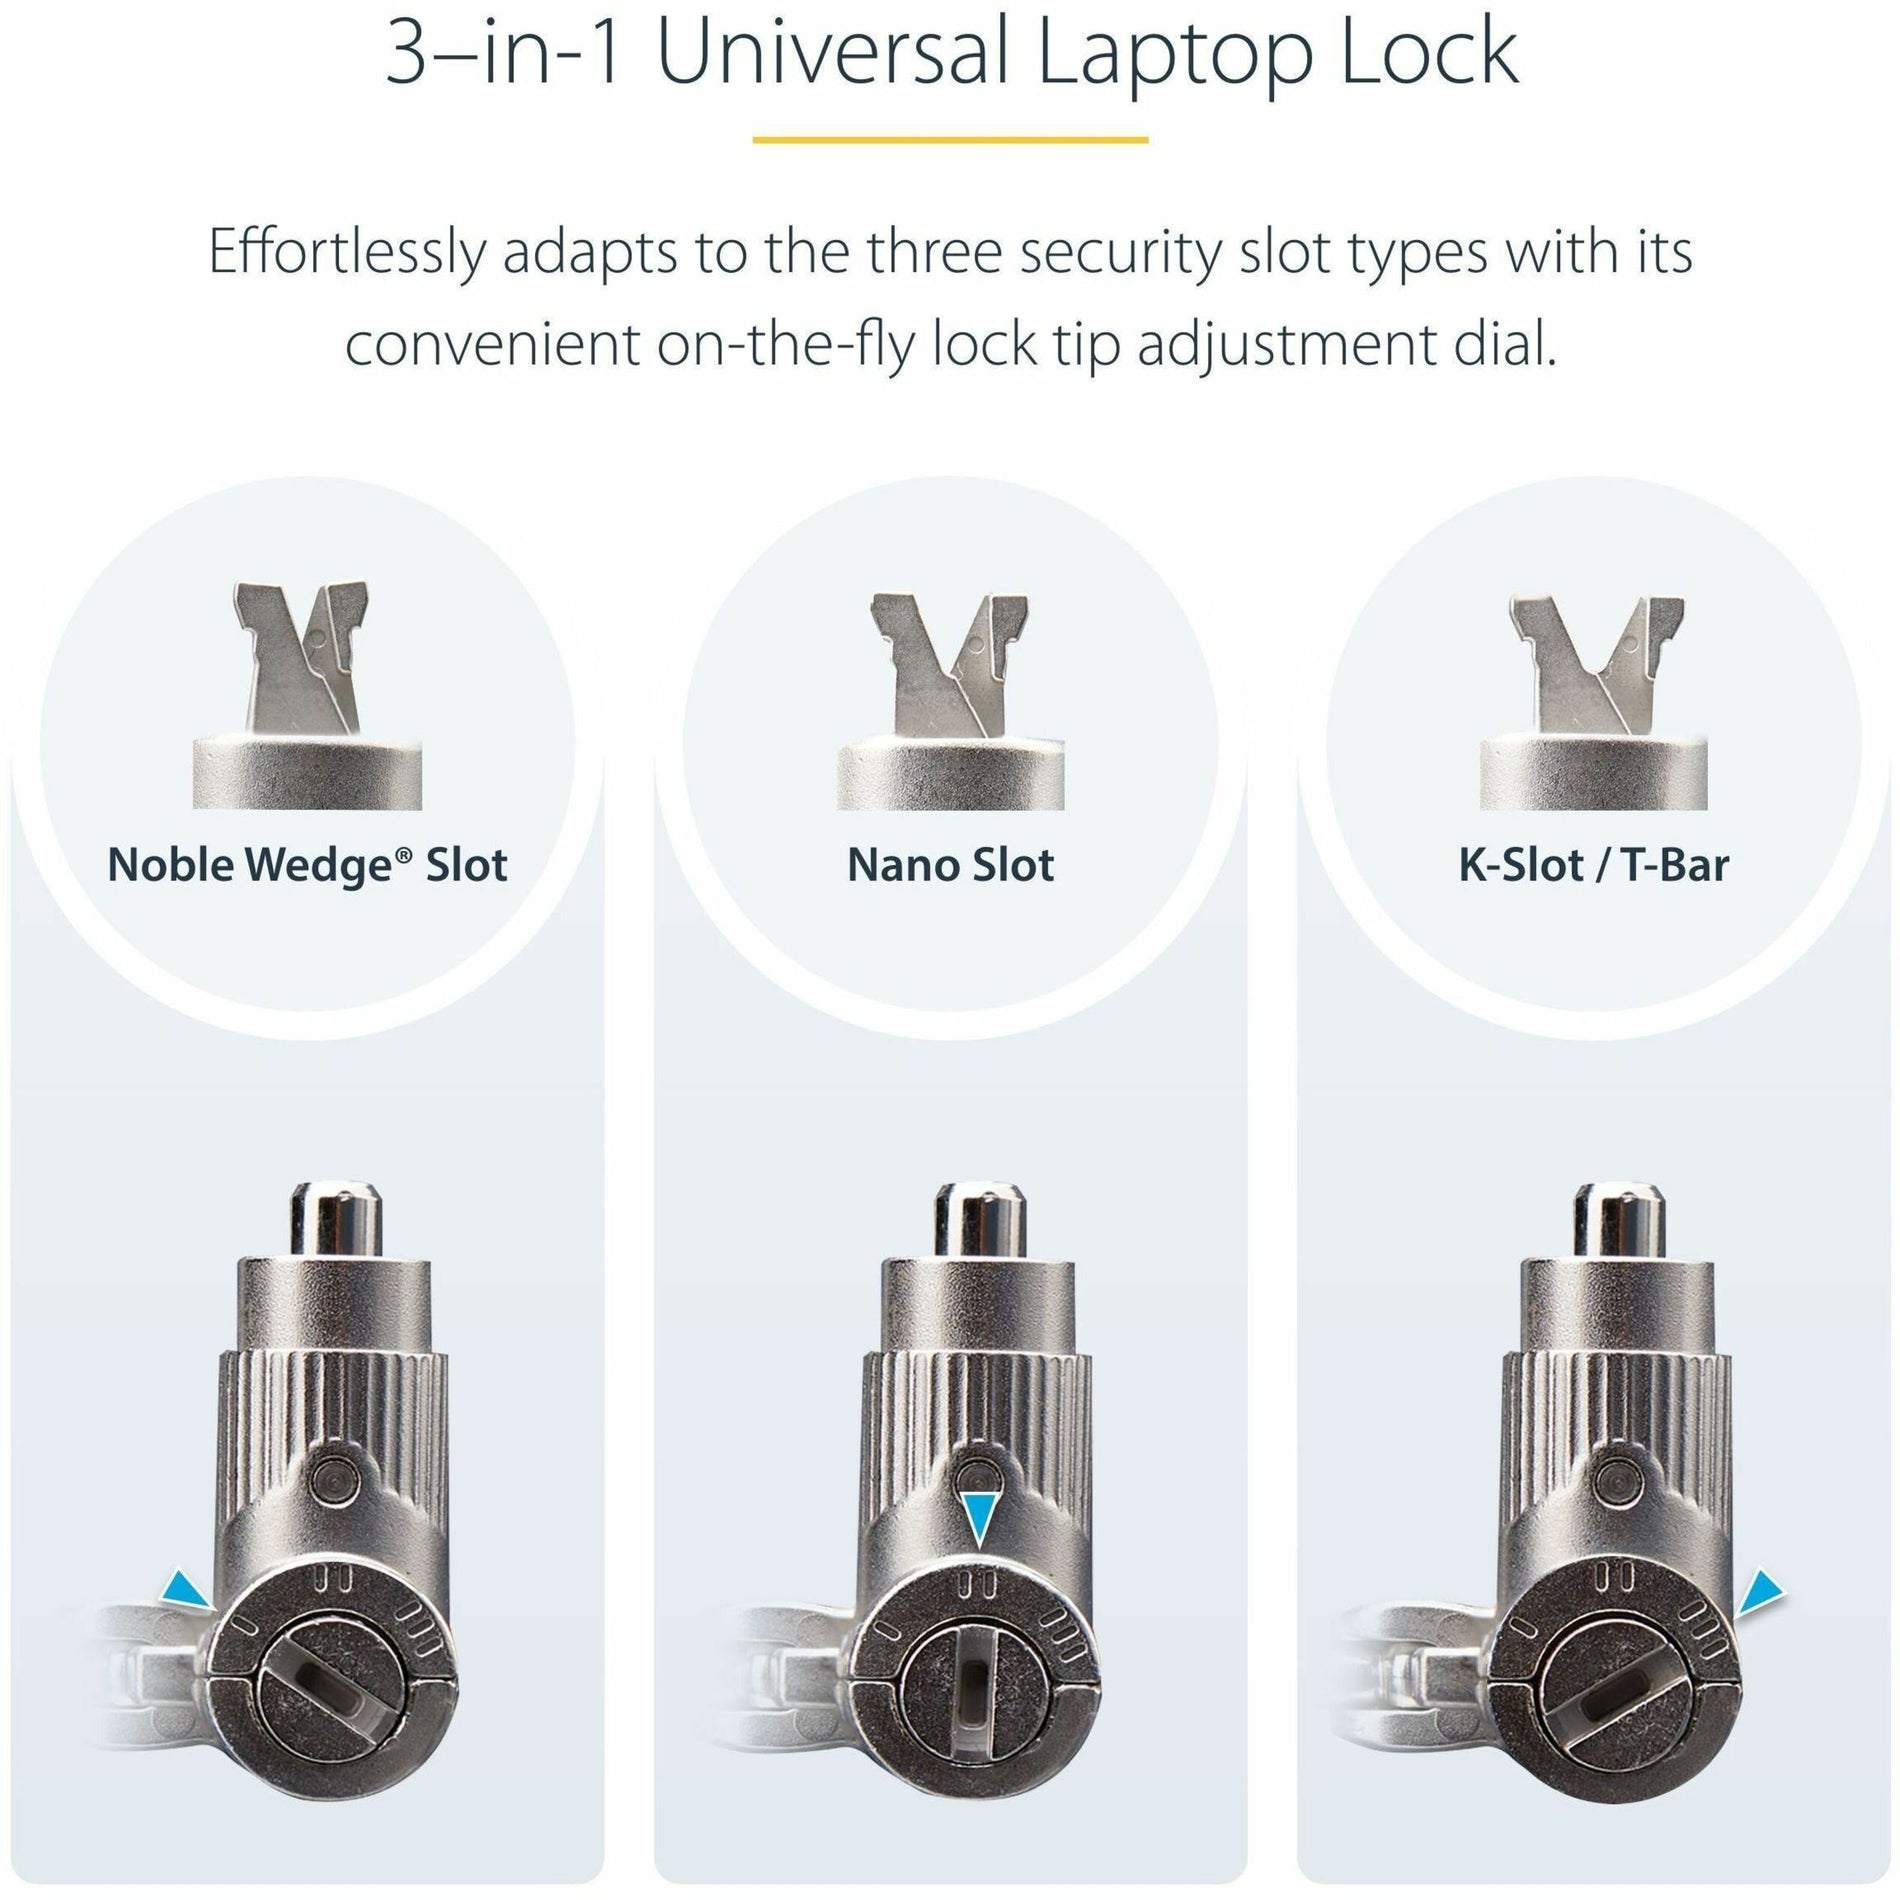 StarTech.com UNIVK-LAPTOP-LOCK Laptop Security Lock, Cable Lock for Notebook, Docking Station, Monitor